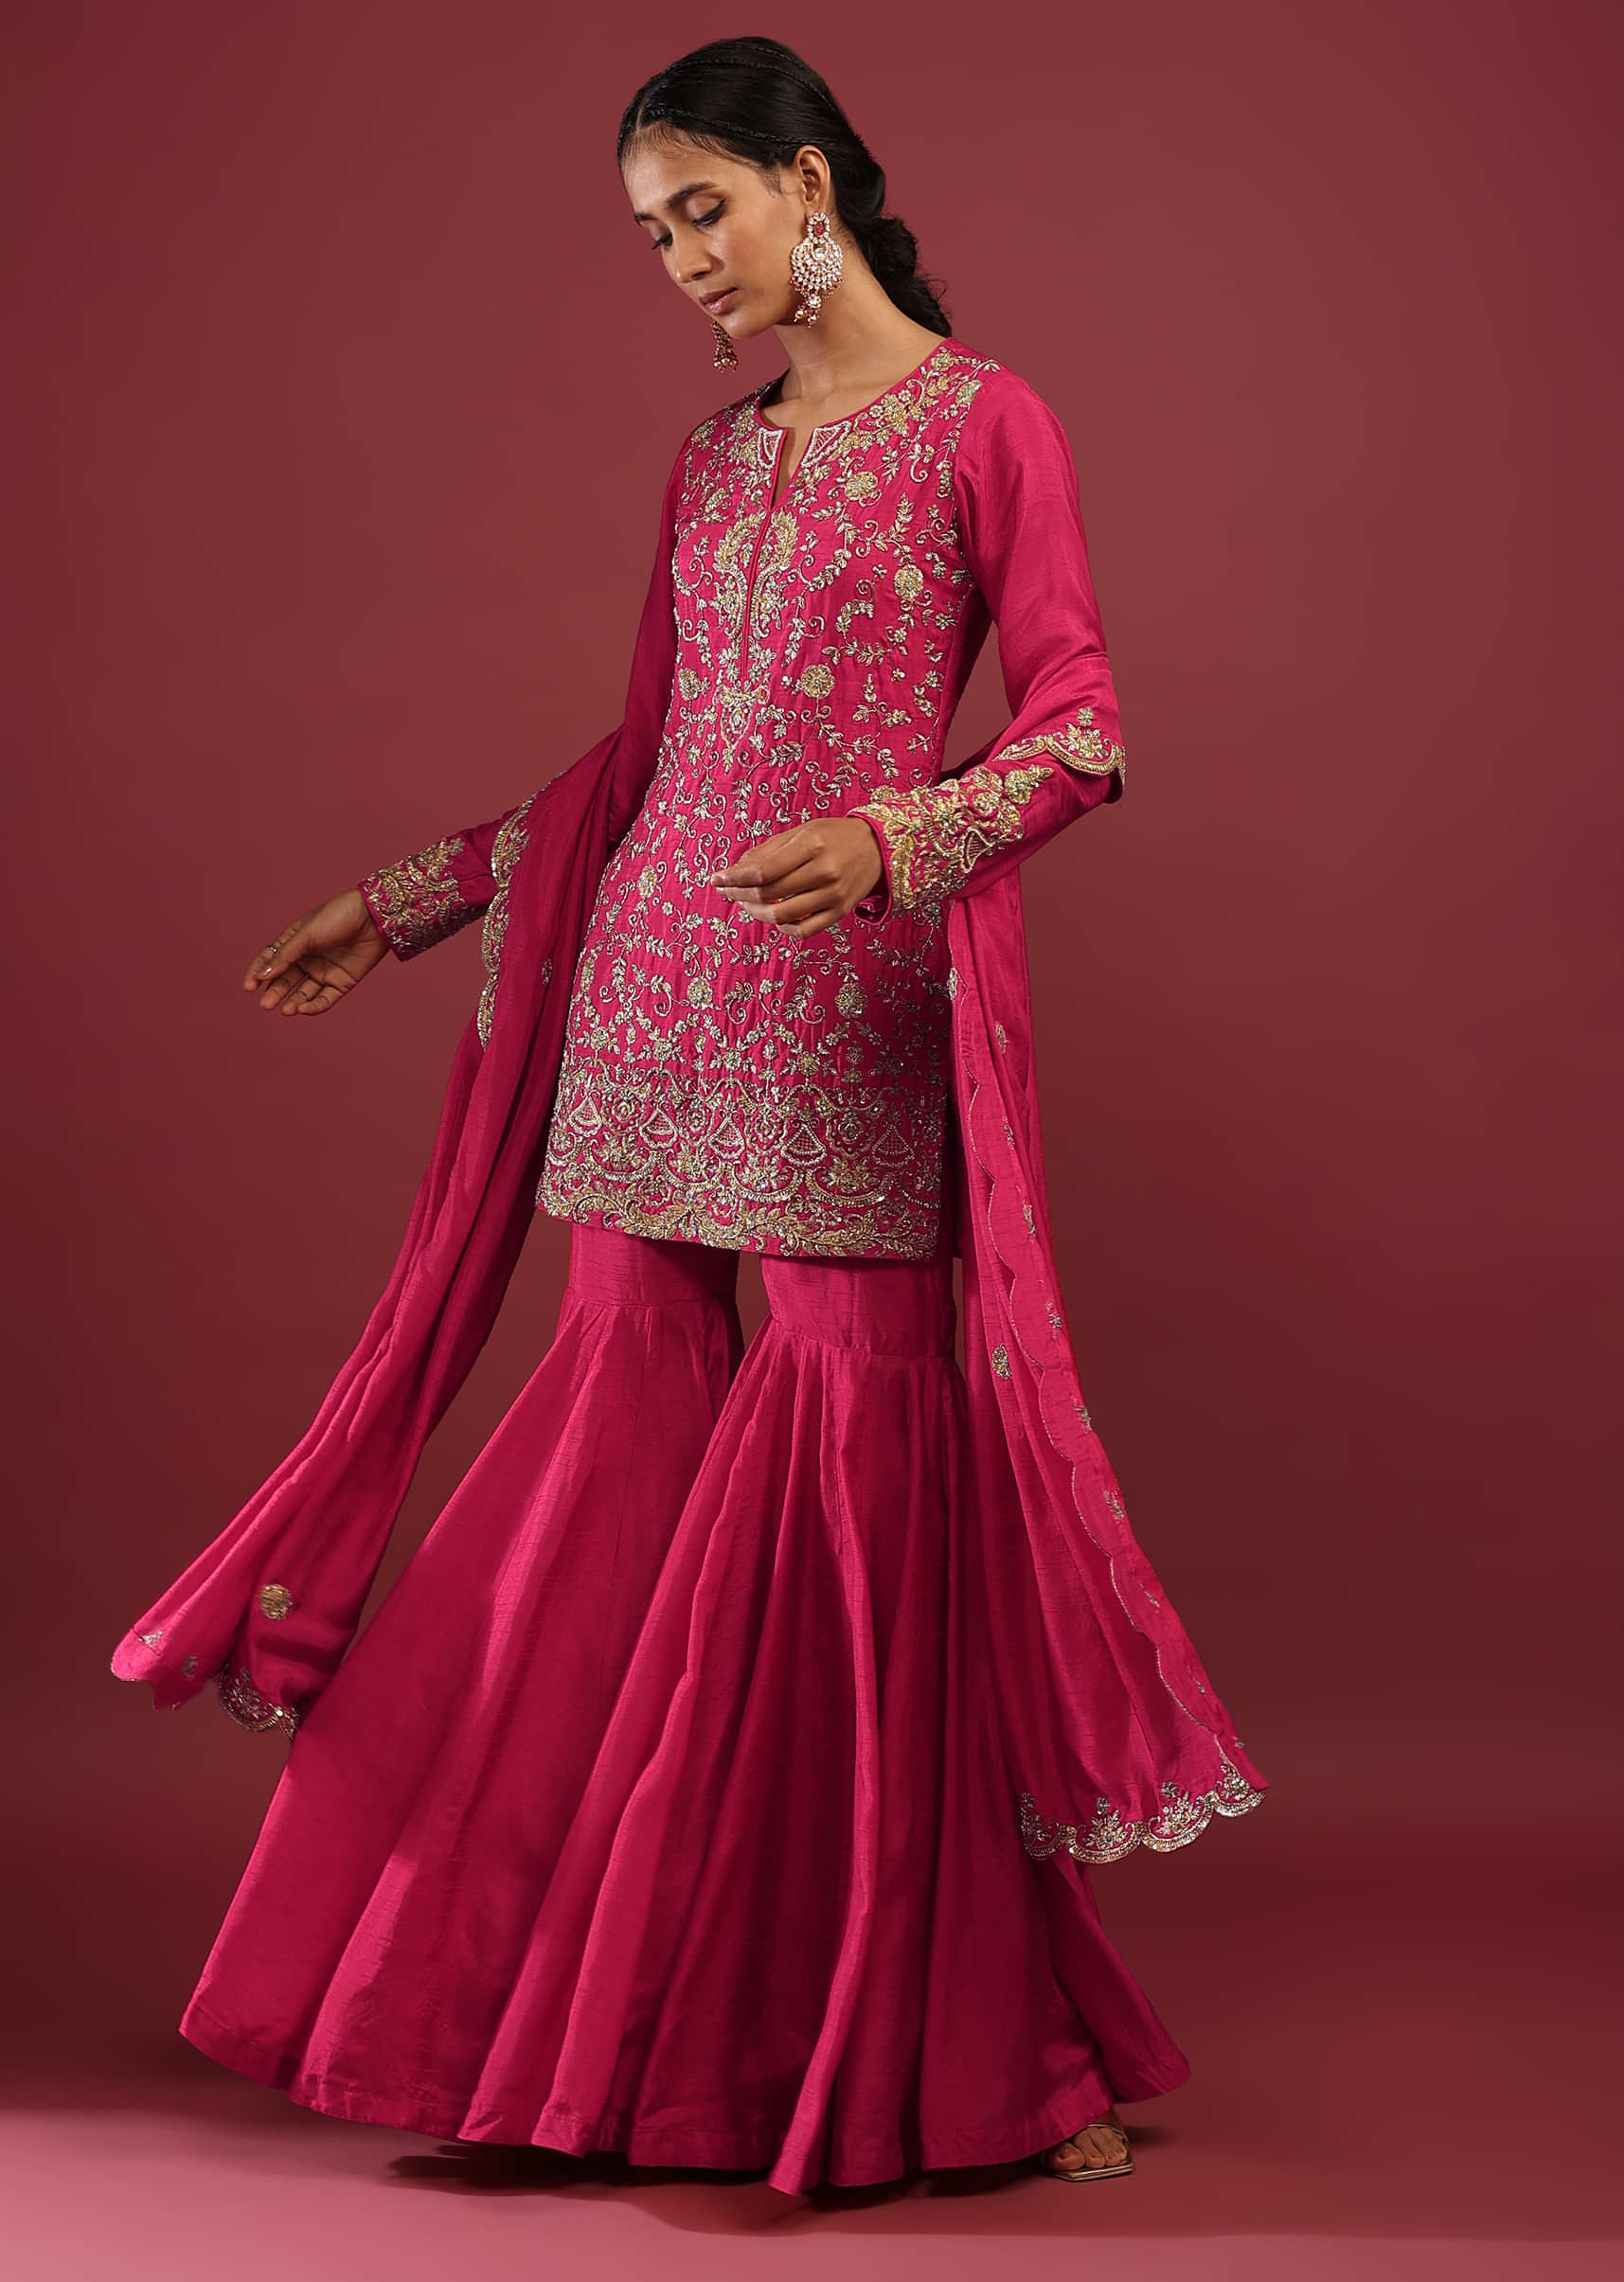 Rani Pink Sharara Suit In Raw Silk With Zardosi And Moti Embroidered Floral Work